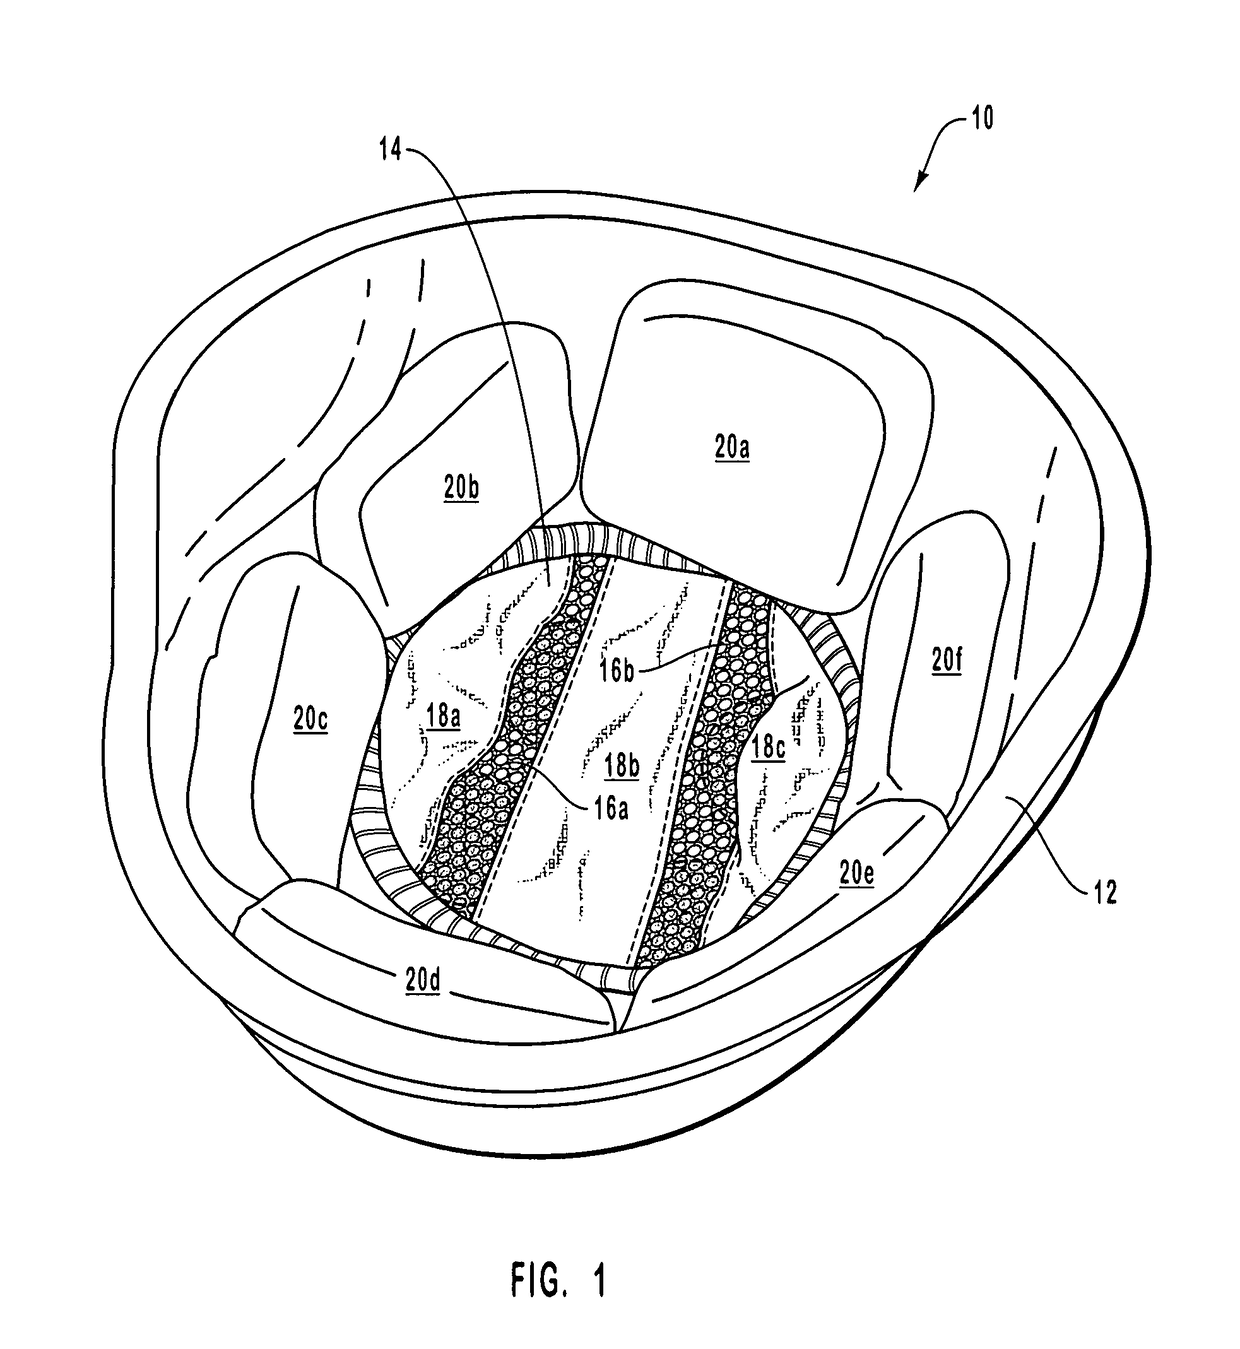 Systems and methods for providing a headgear cooling liner